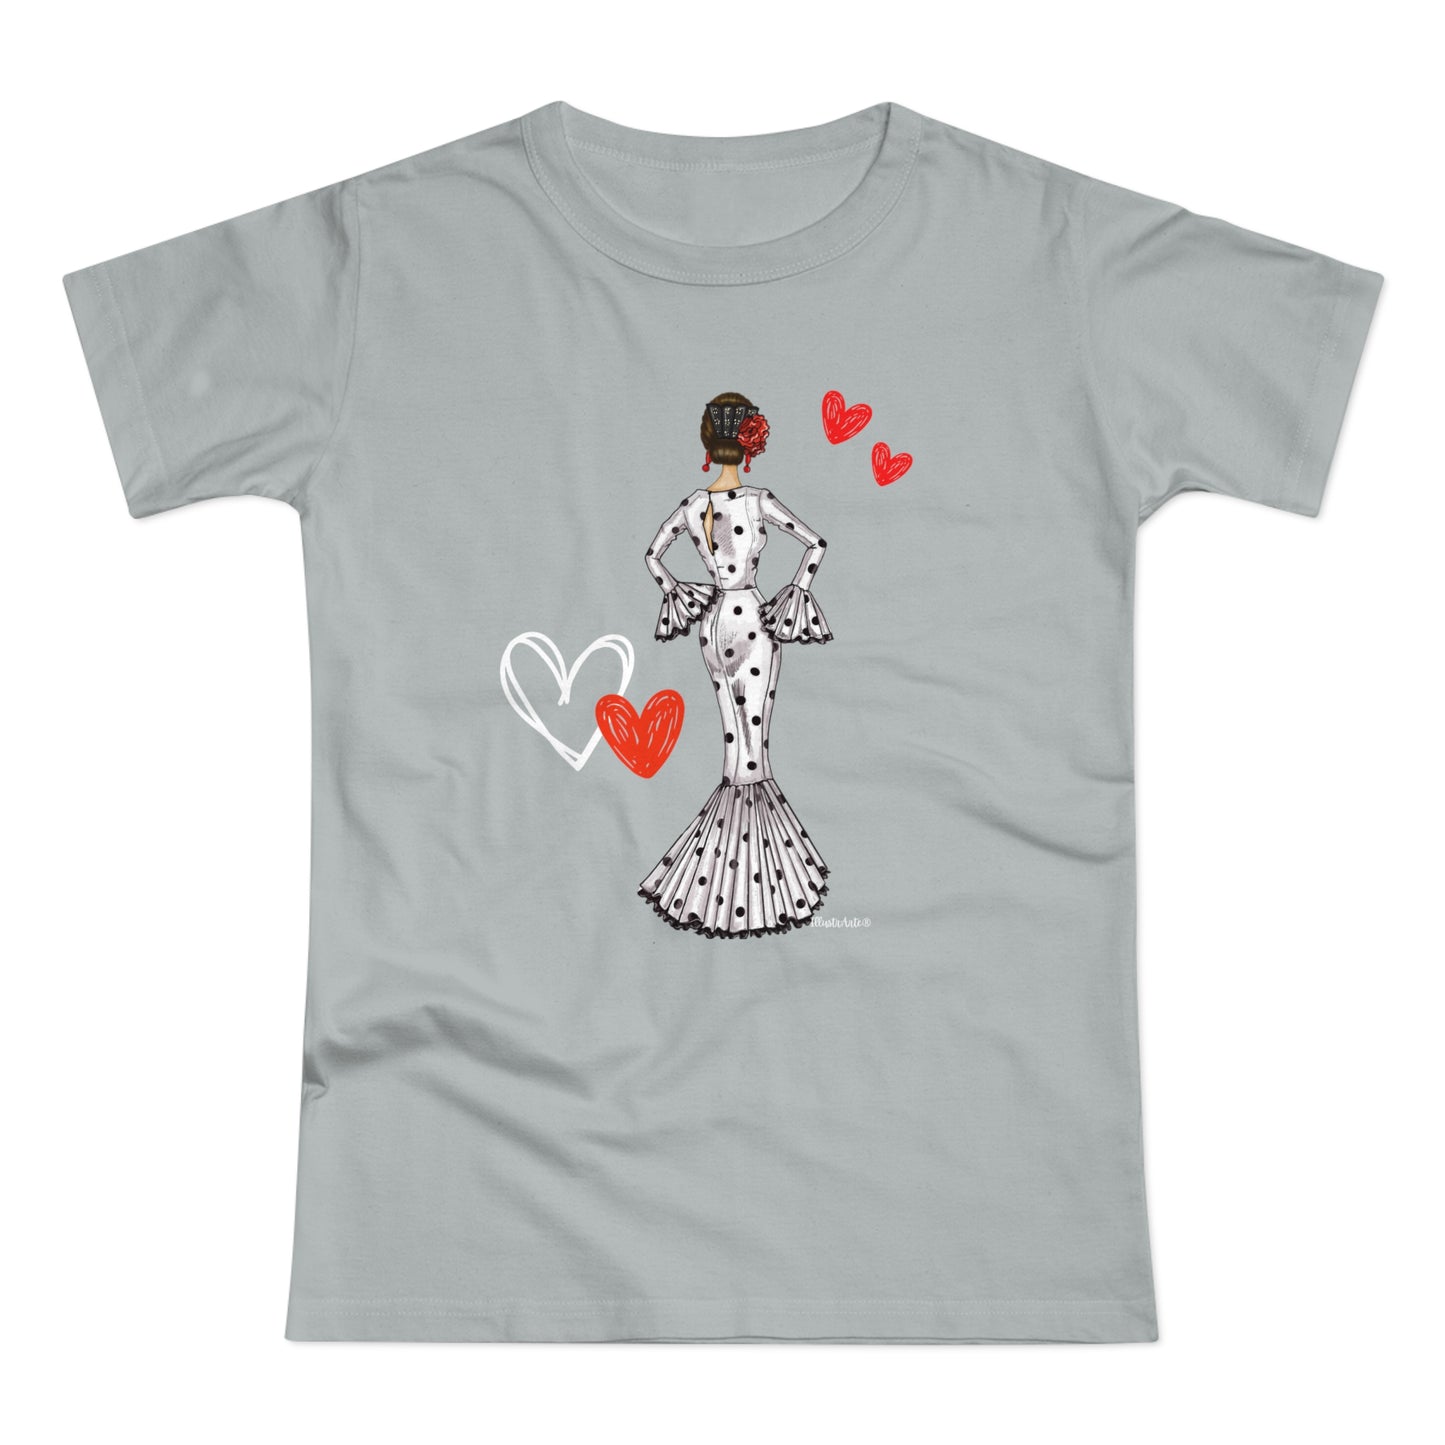 a t - shirt with an image of a woman holding a heart